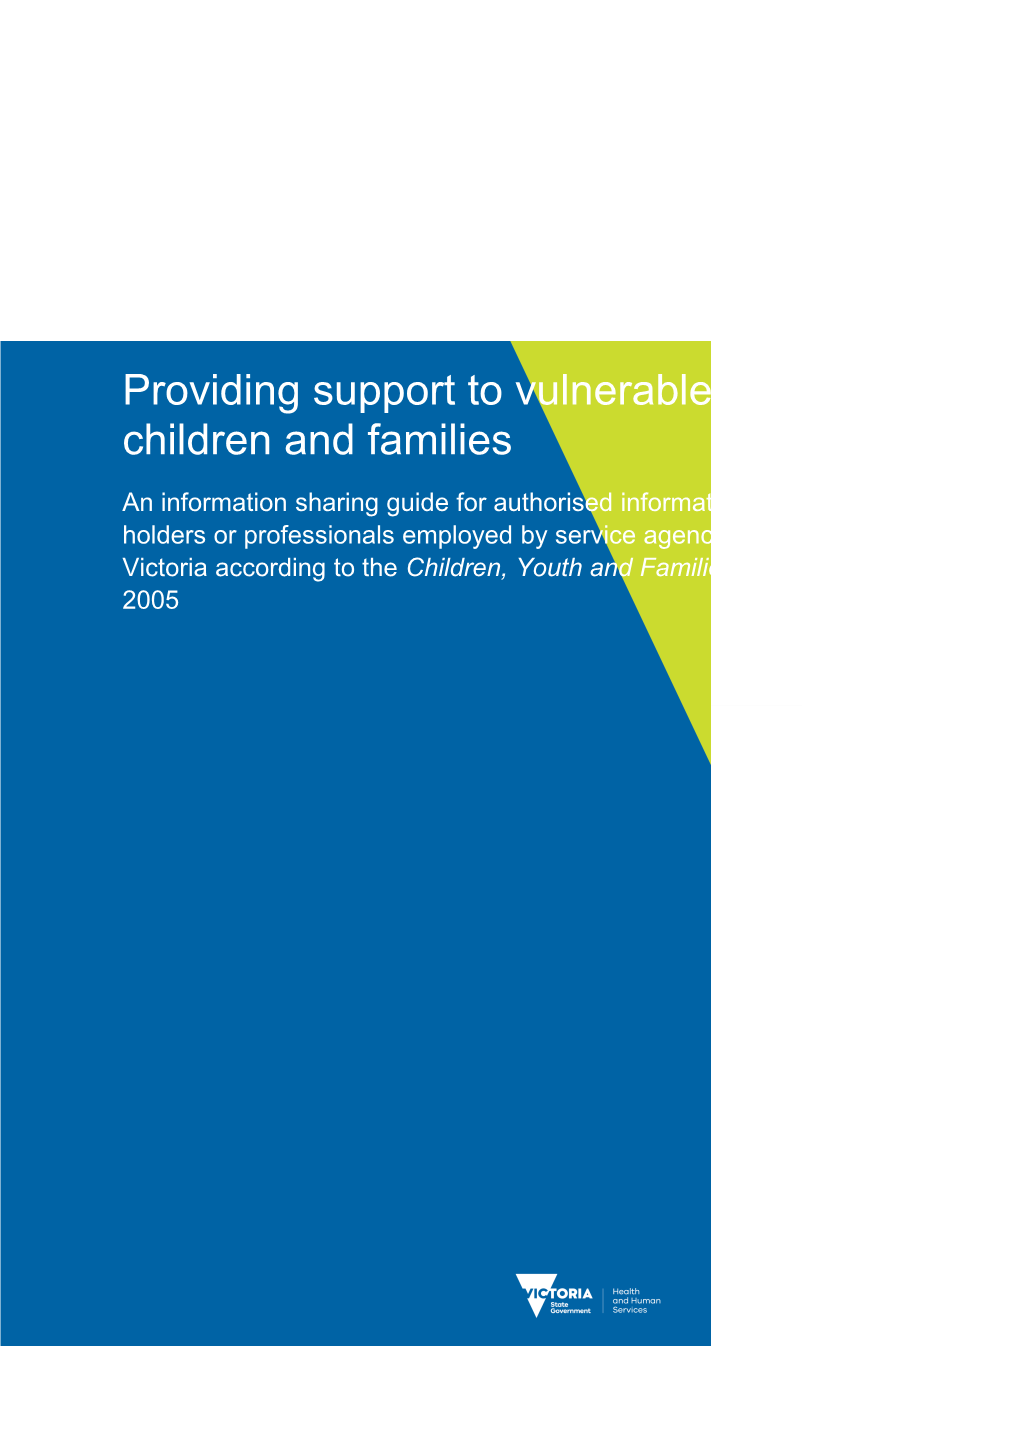 Providing Support to Vulnerable Children and Their Families a Guide for Authorised Information